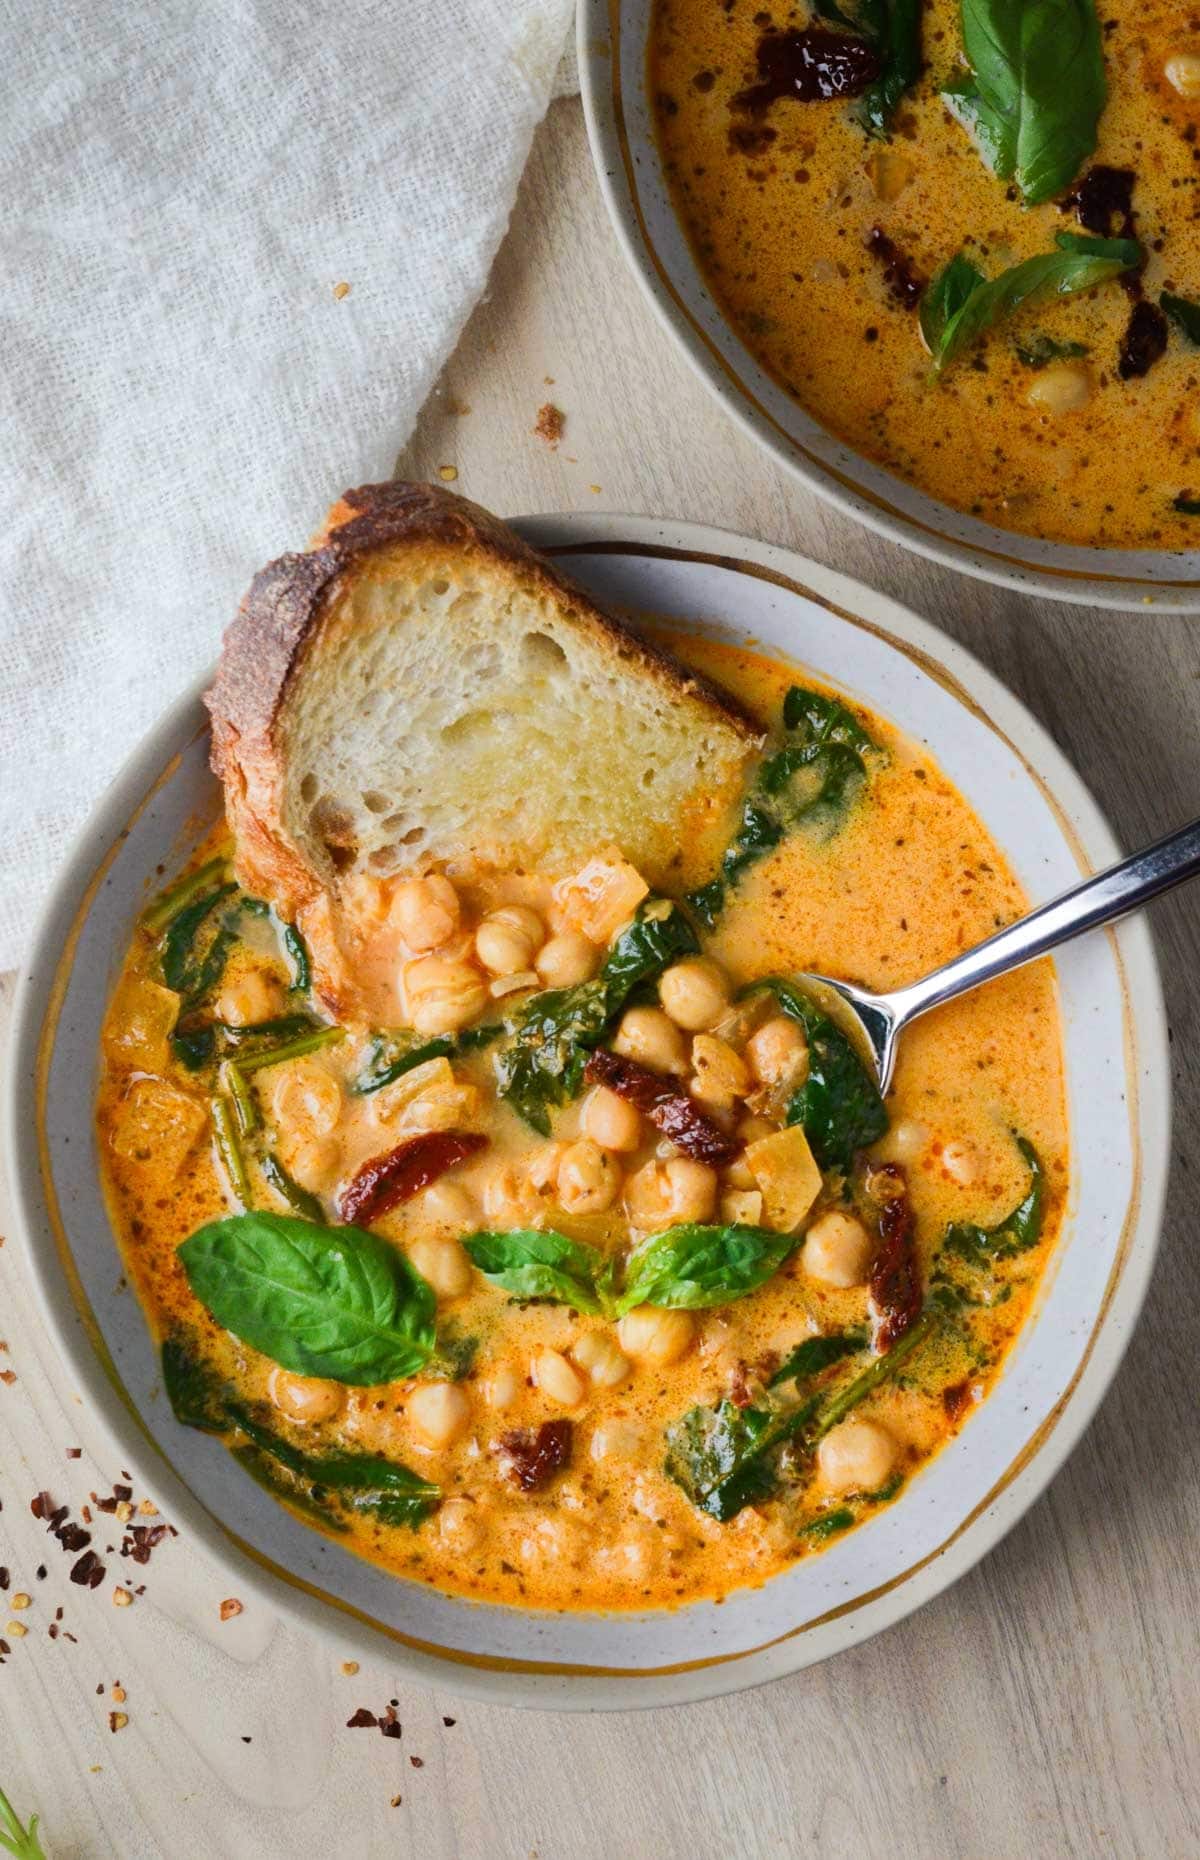 Sliced bread dipped on a bowl of homemade Vegan Tuscan Chickpea Soup